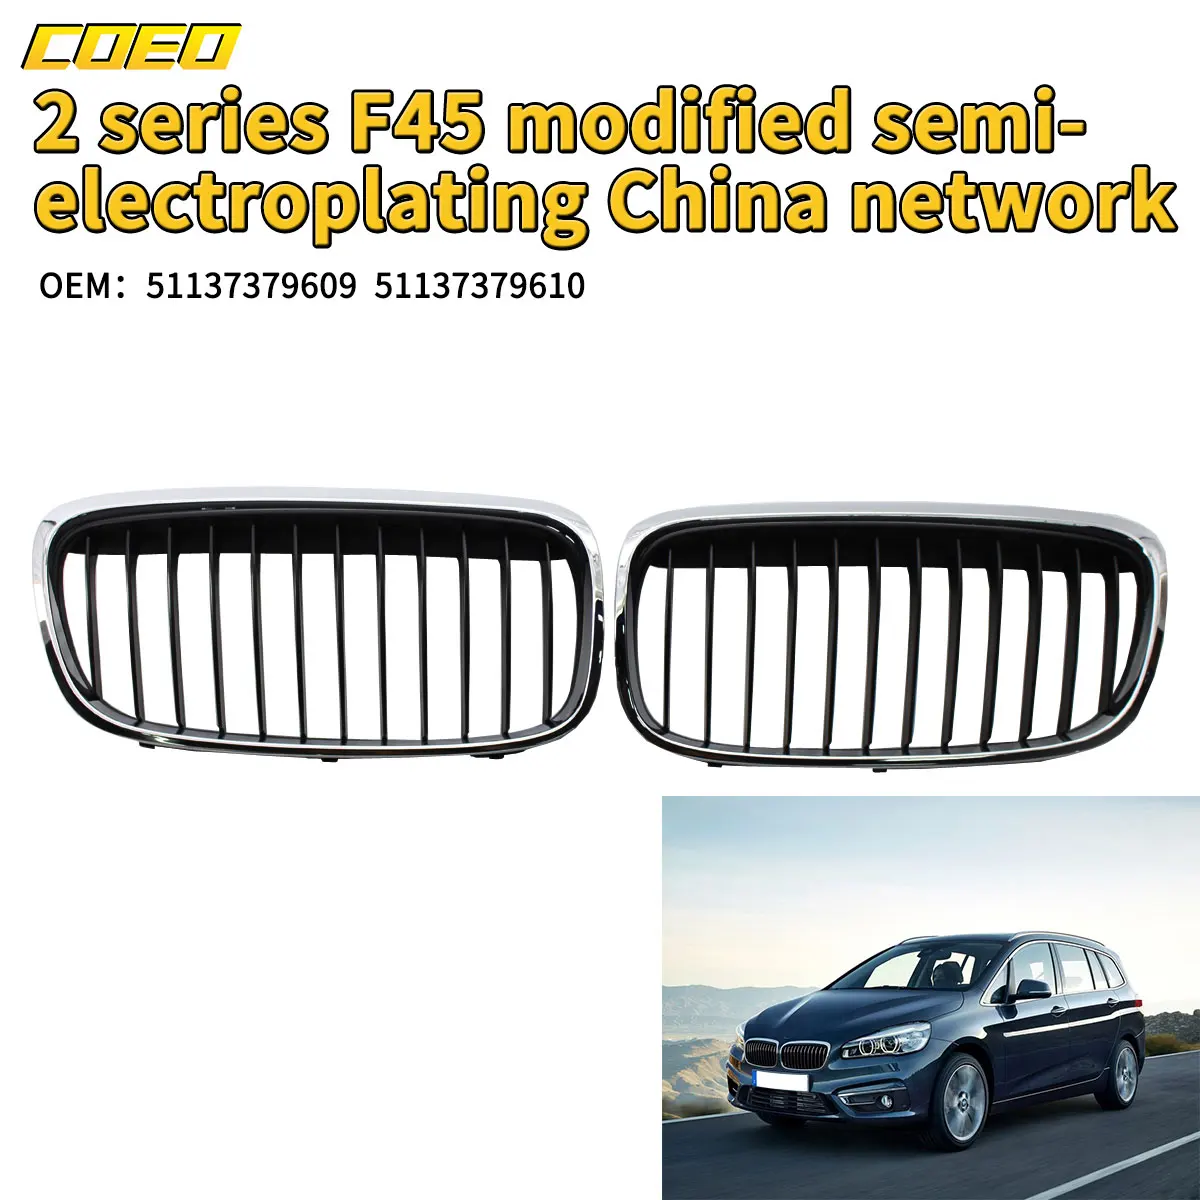 

Semi Electroplate Car Grill Replacement Parts For BMW 2series F45 OEM 51137379609 51137379611 For Repair Upgrade Vehicle Looks